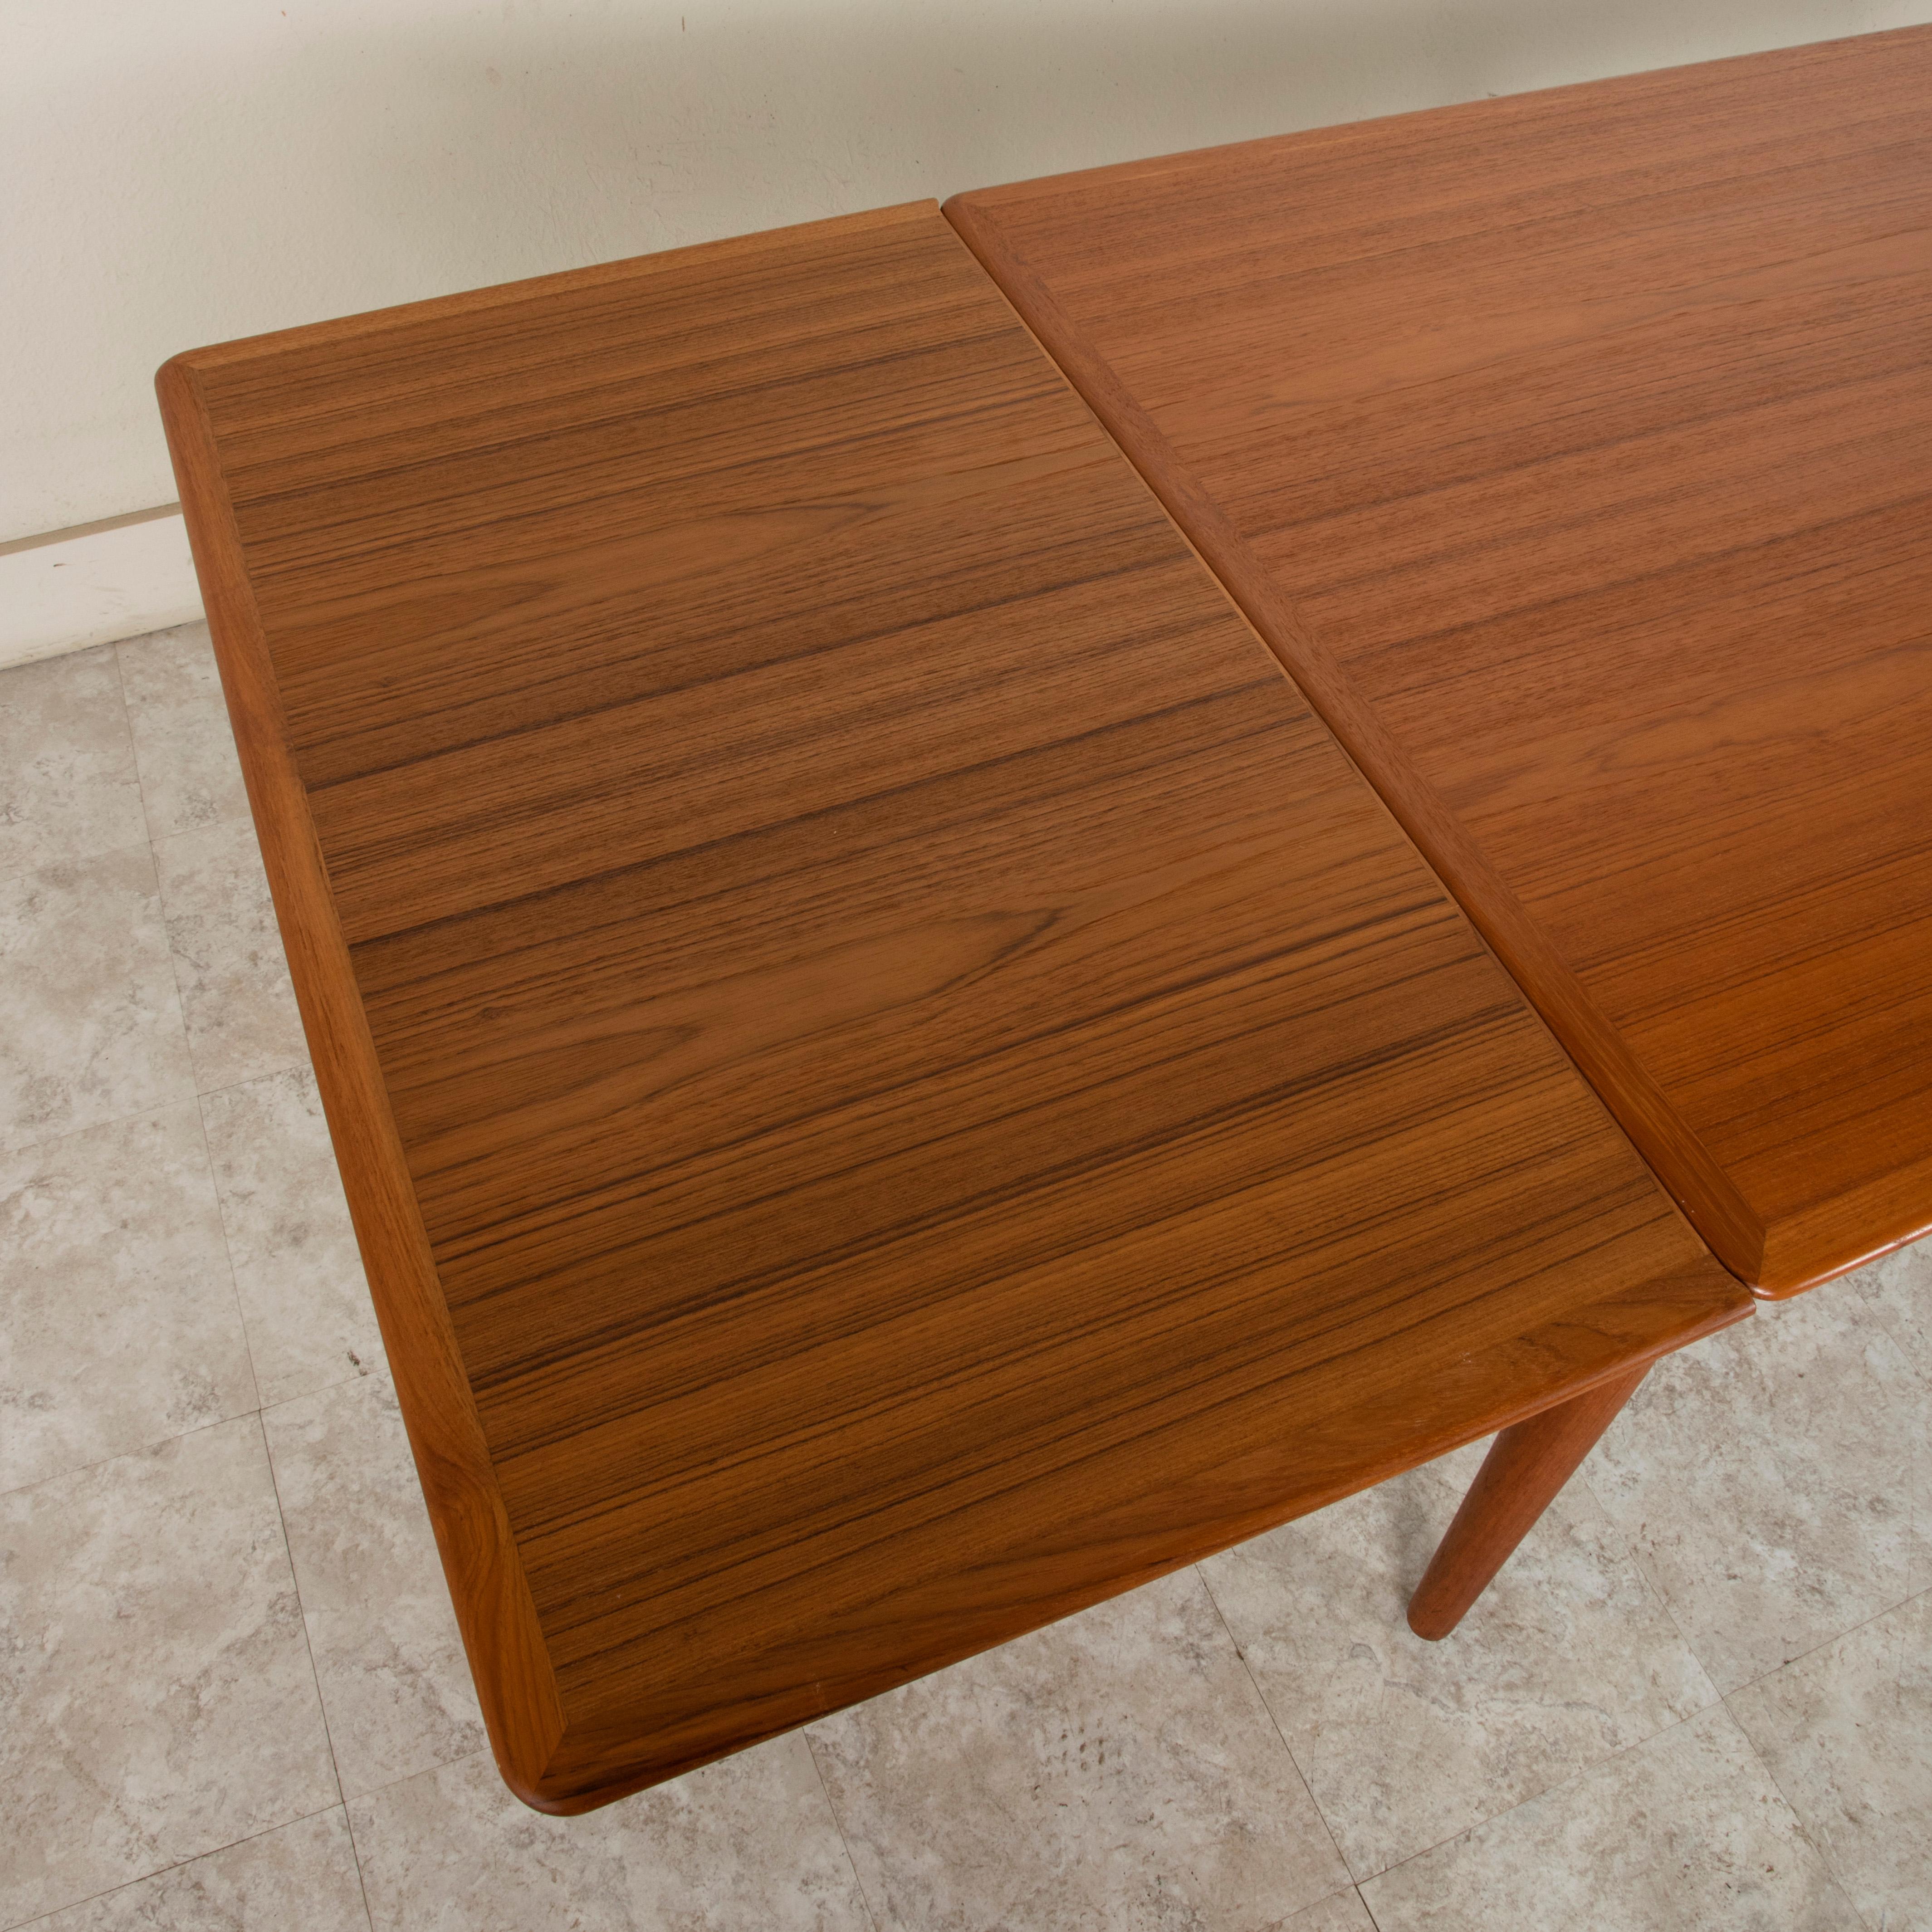 Midcentury Danish Modern Teak Dining Table with Draw Leaves 2